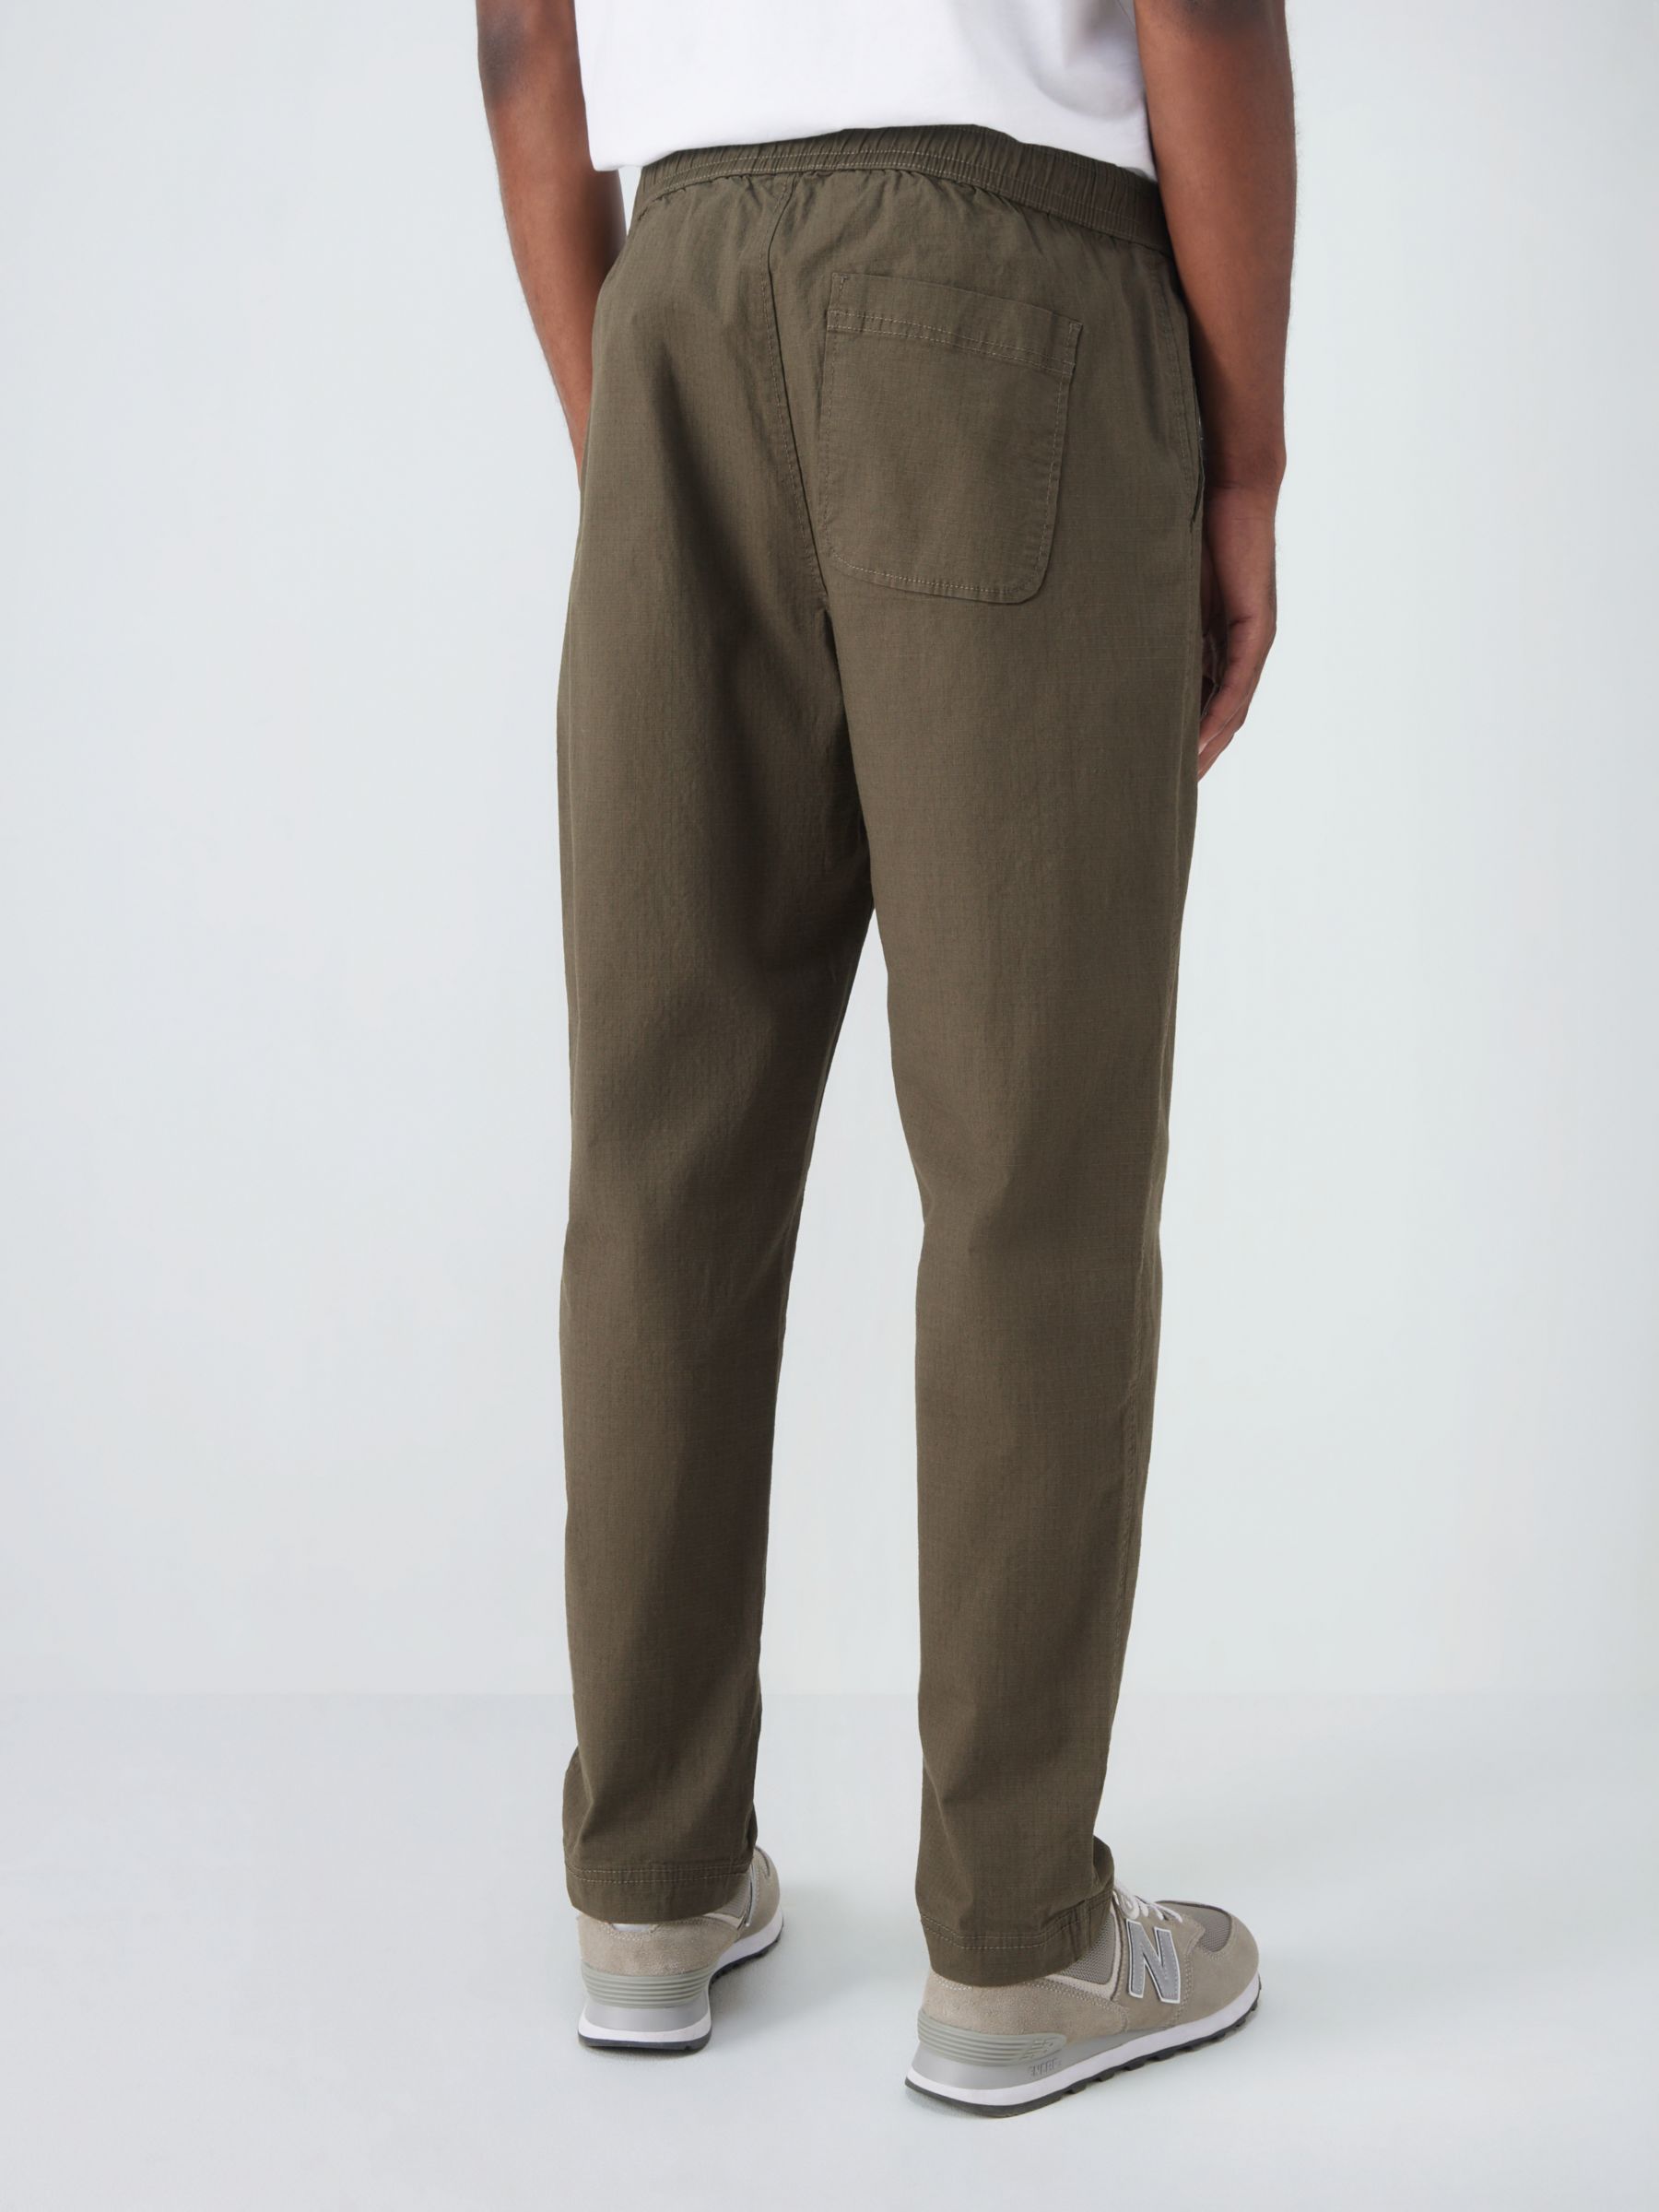 John Lewis ANYDAY Relaxed Fit Ripstop Stretch Cotton Ankle Trousers, Khaki, S